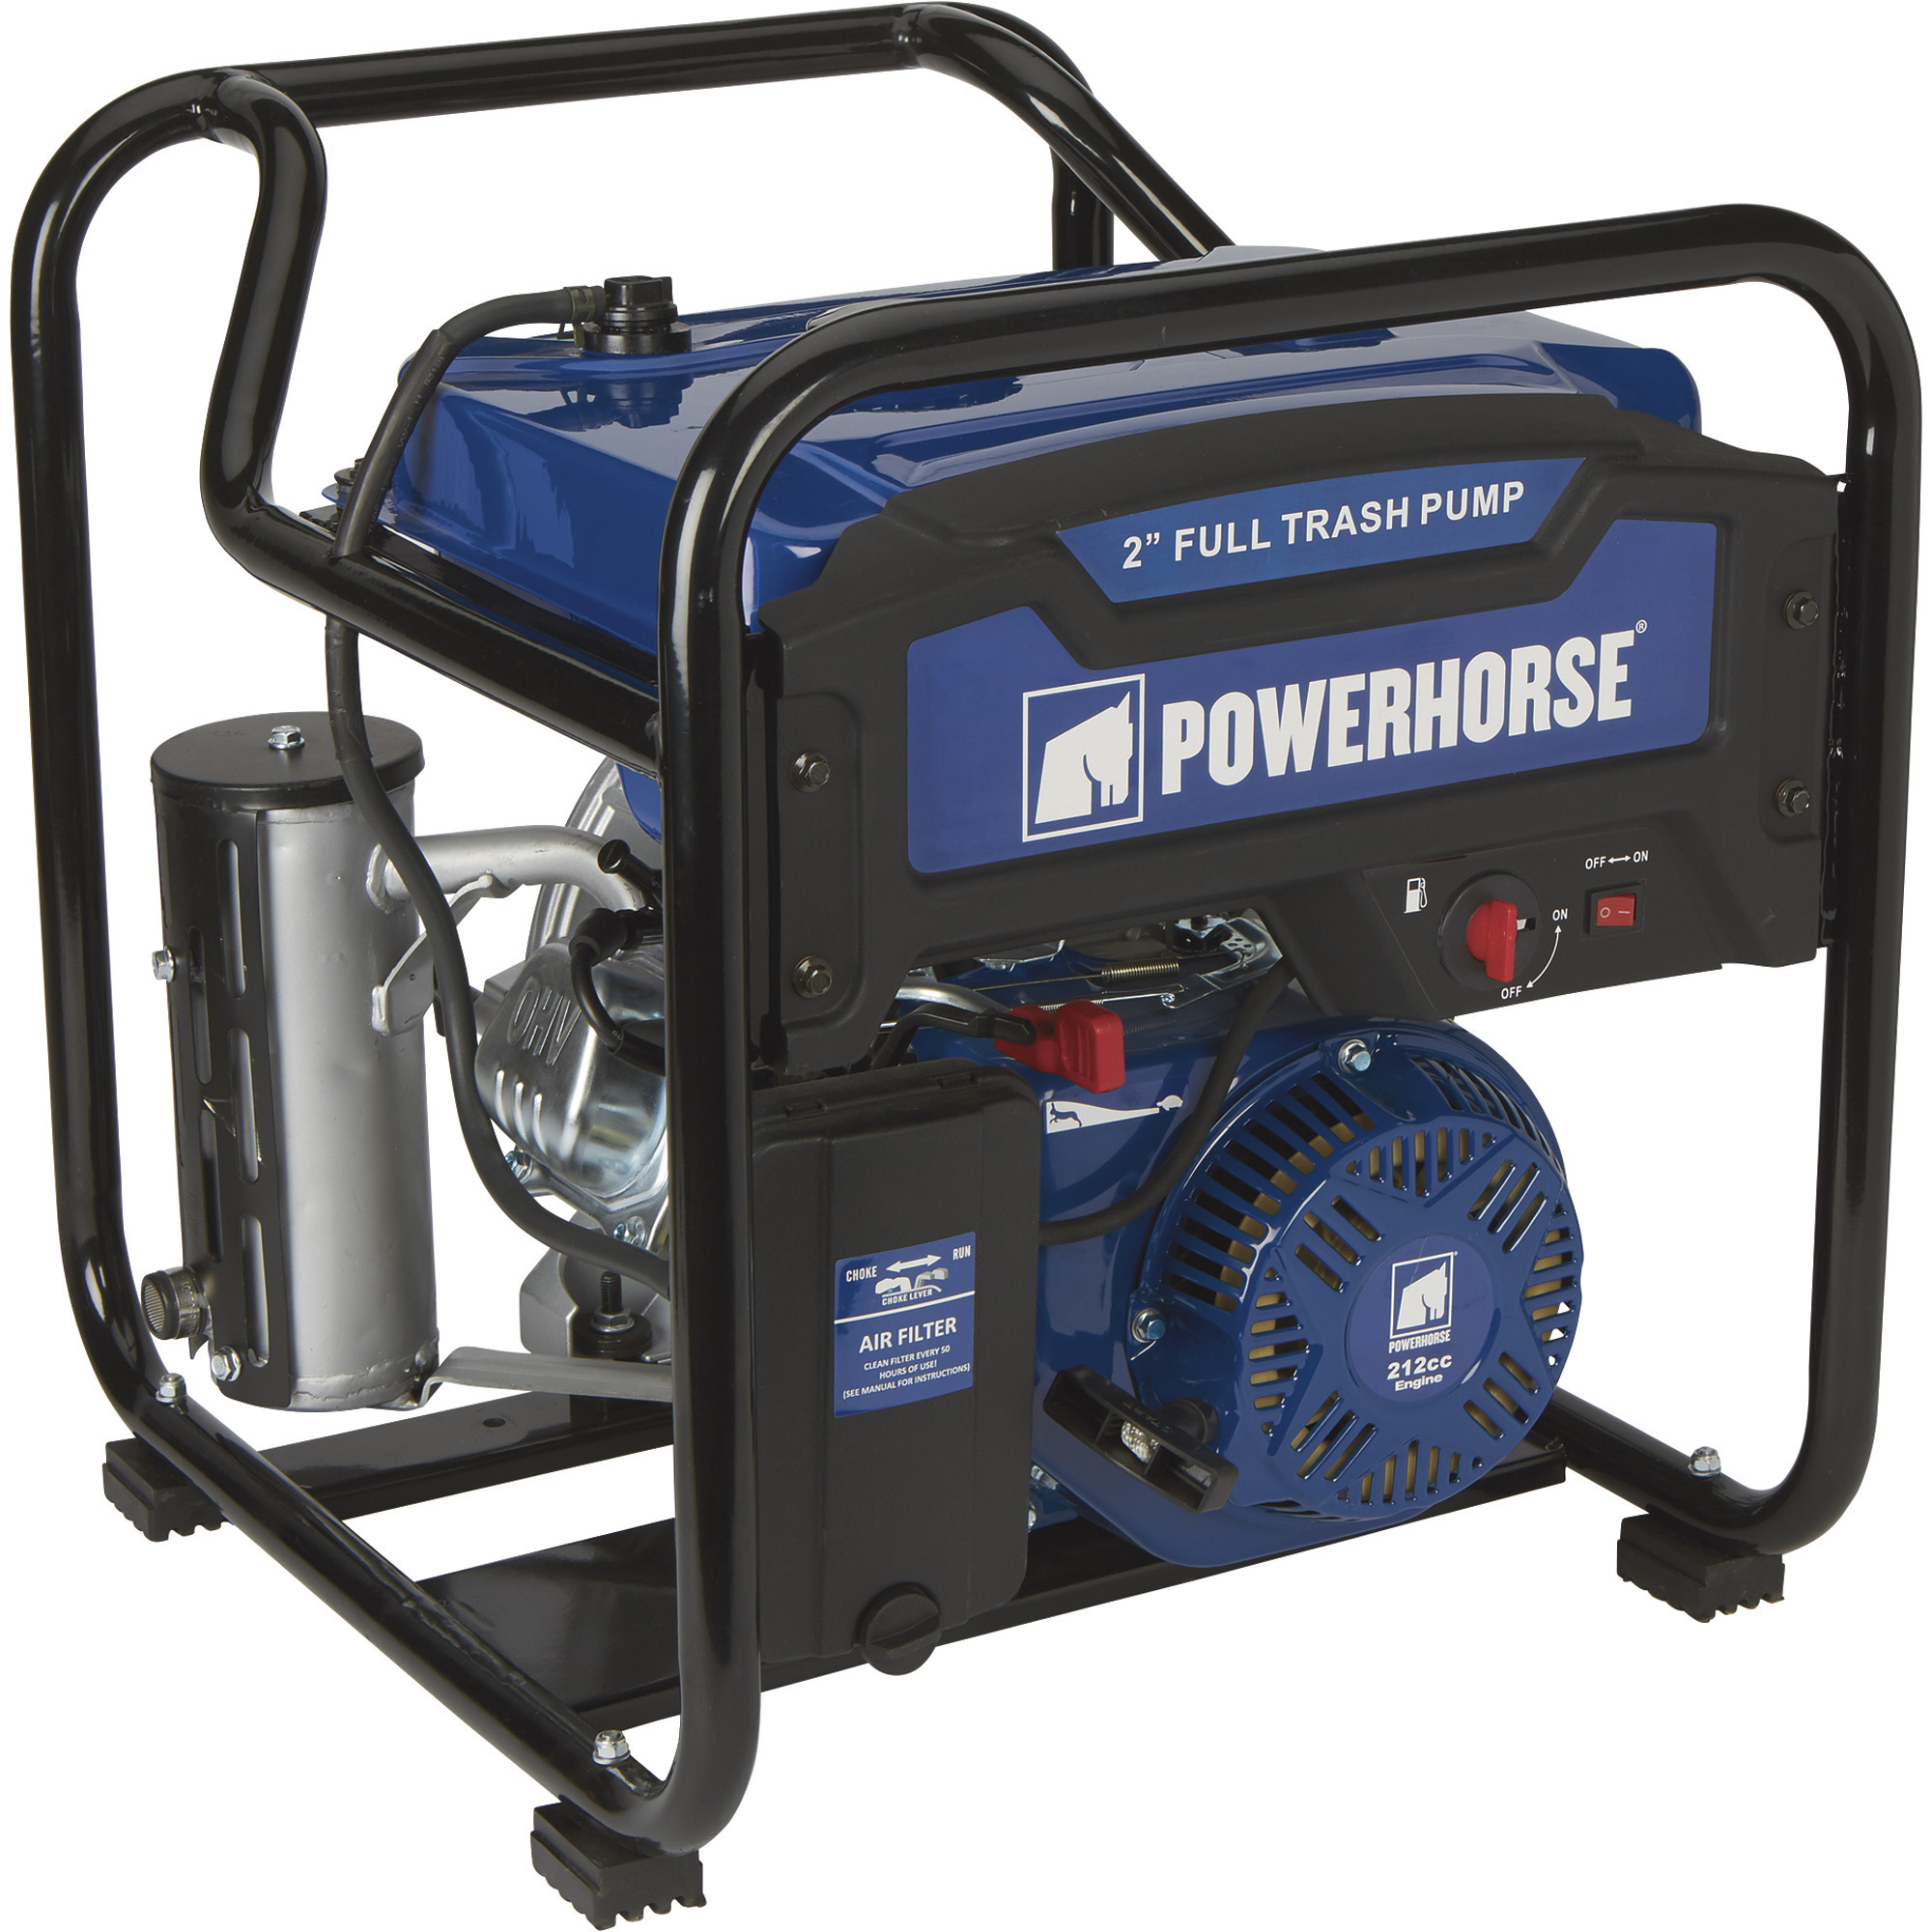 Powerhorse Extended Run Full Trash Pump, 2Inch Ports, 11,000 GPH, 3/4Inch Solids Capacity, 212cc OHV Engine, Model DS20W